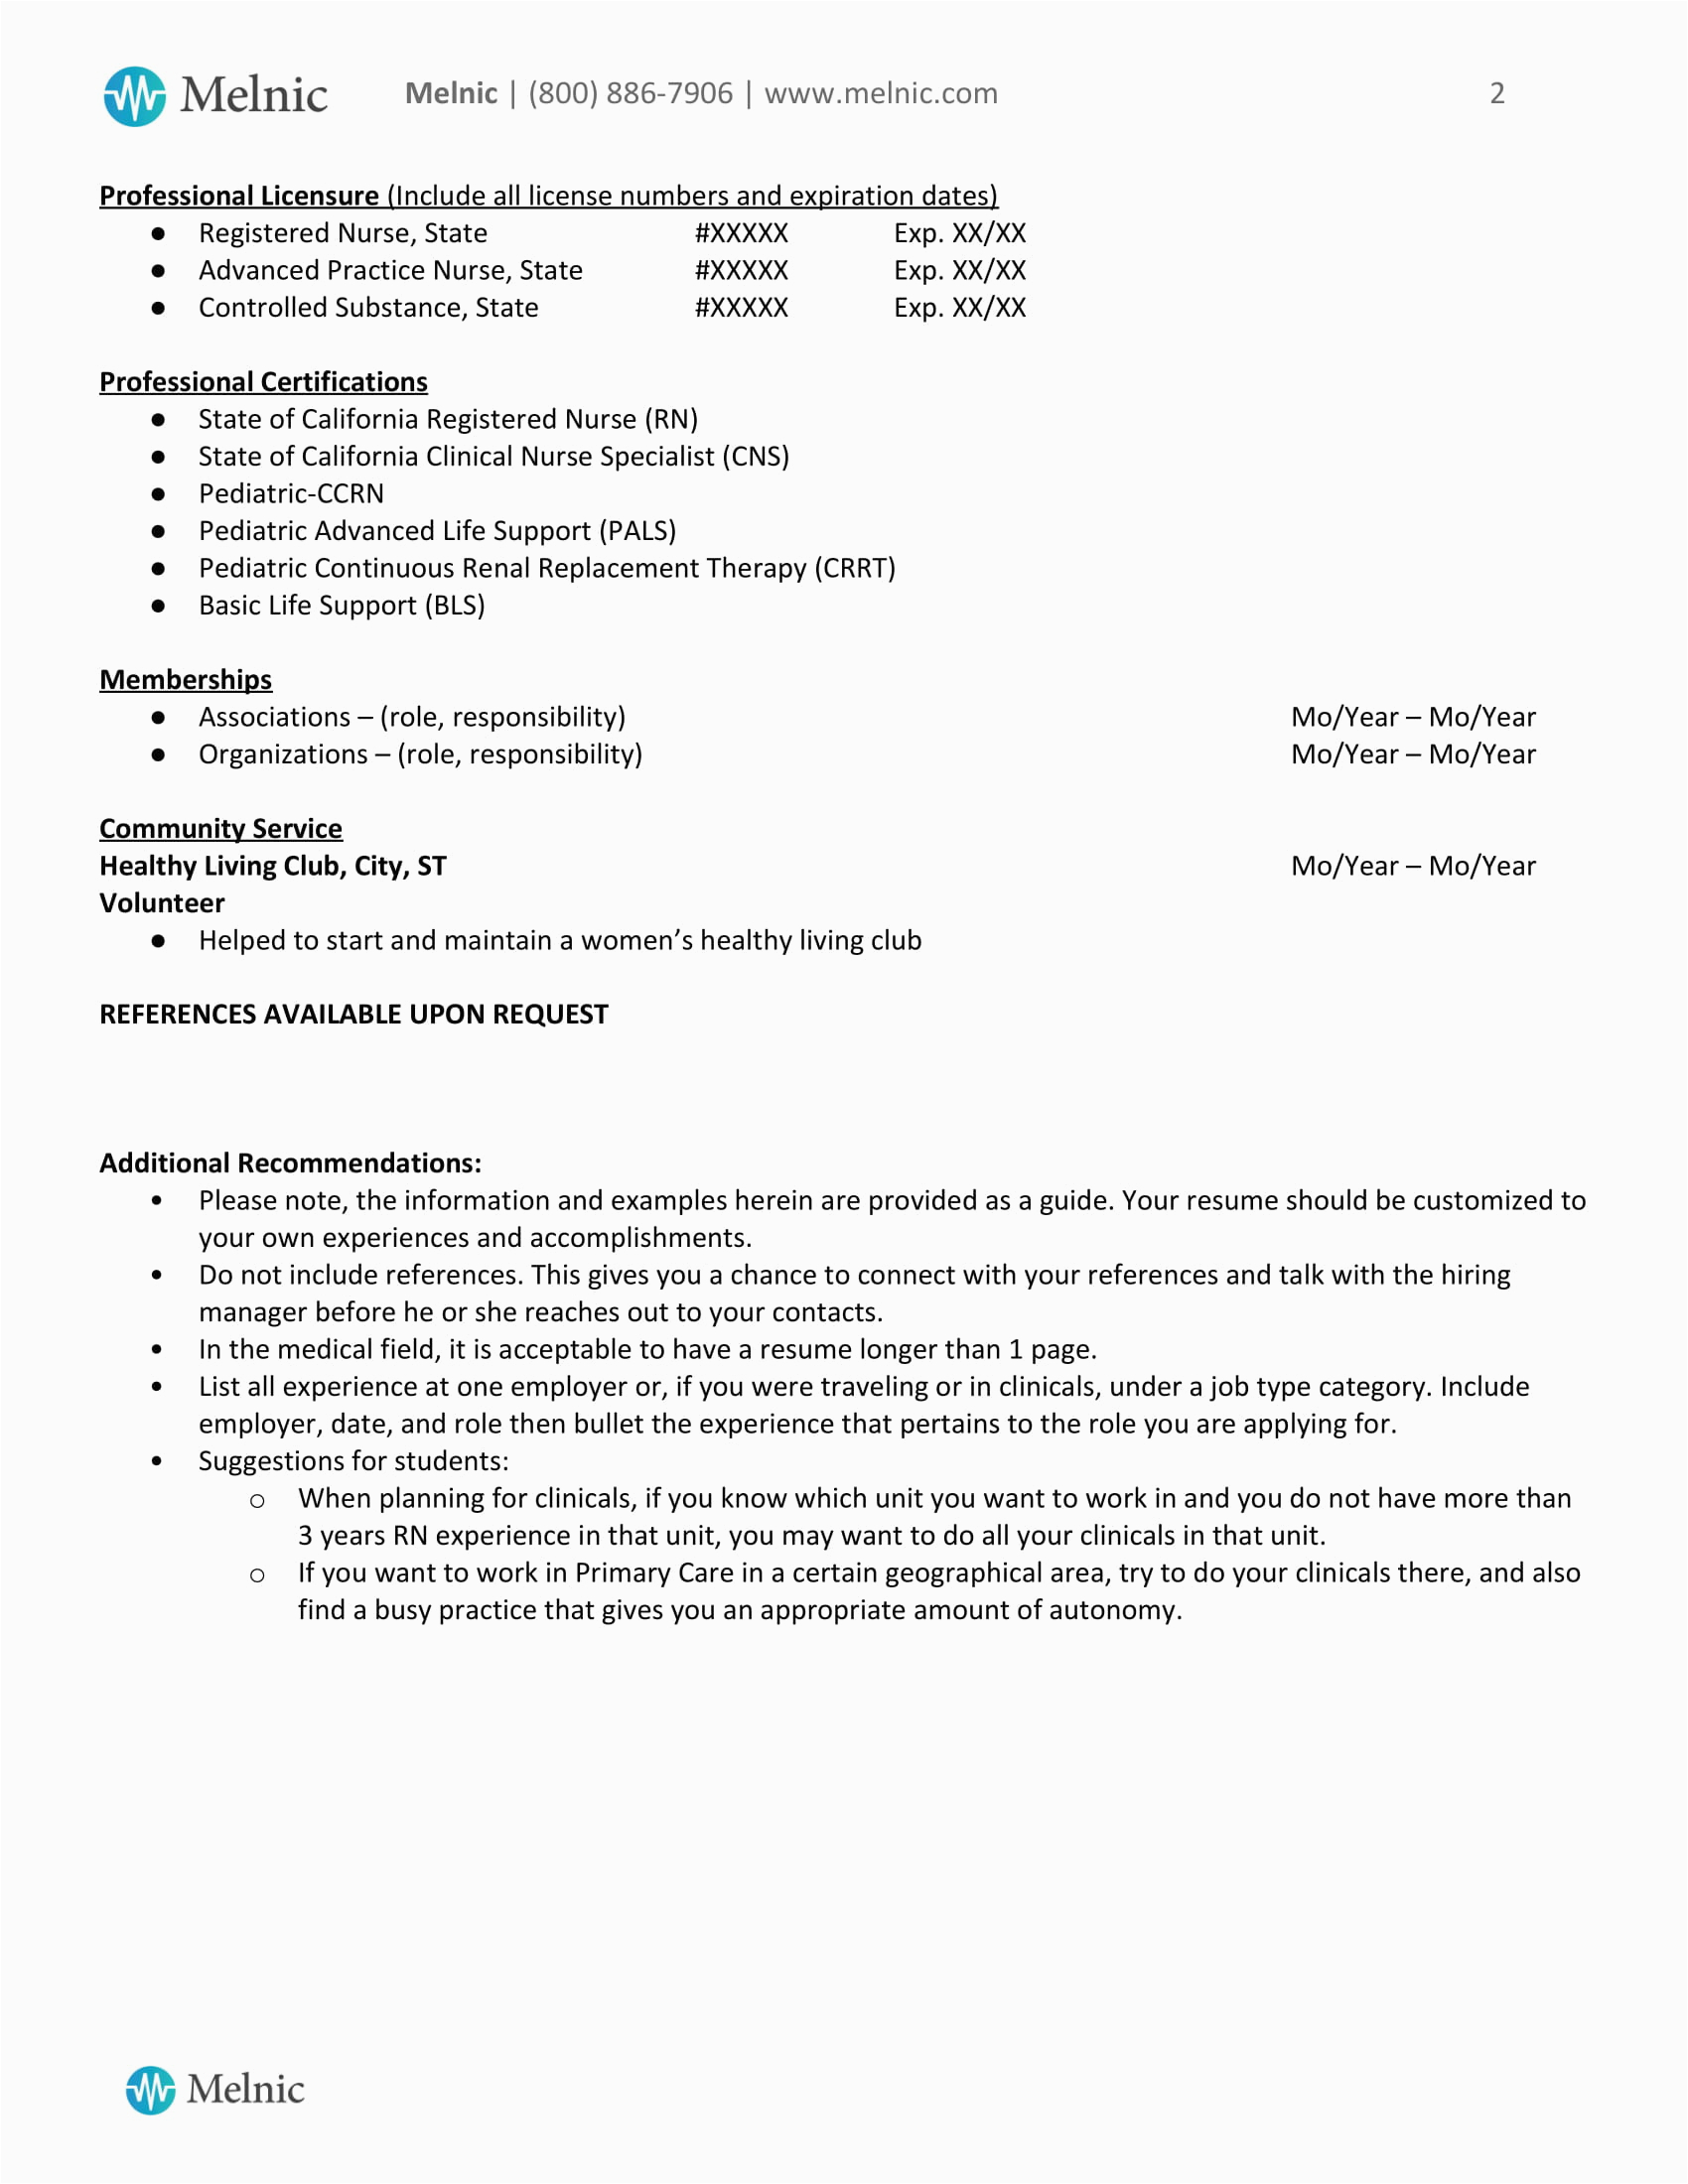 Sample Resume for New Job Seekers Clinical Nurse Specialist Sample Resume for Job Seekers